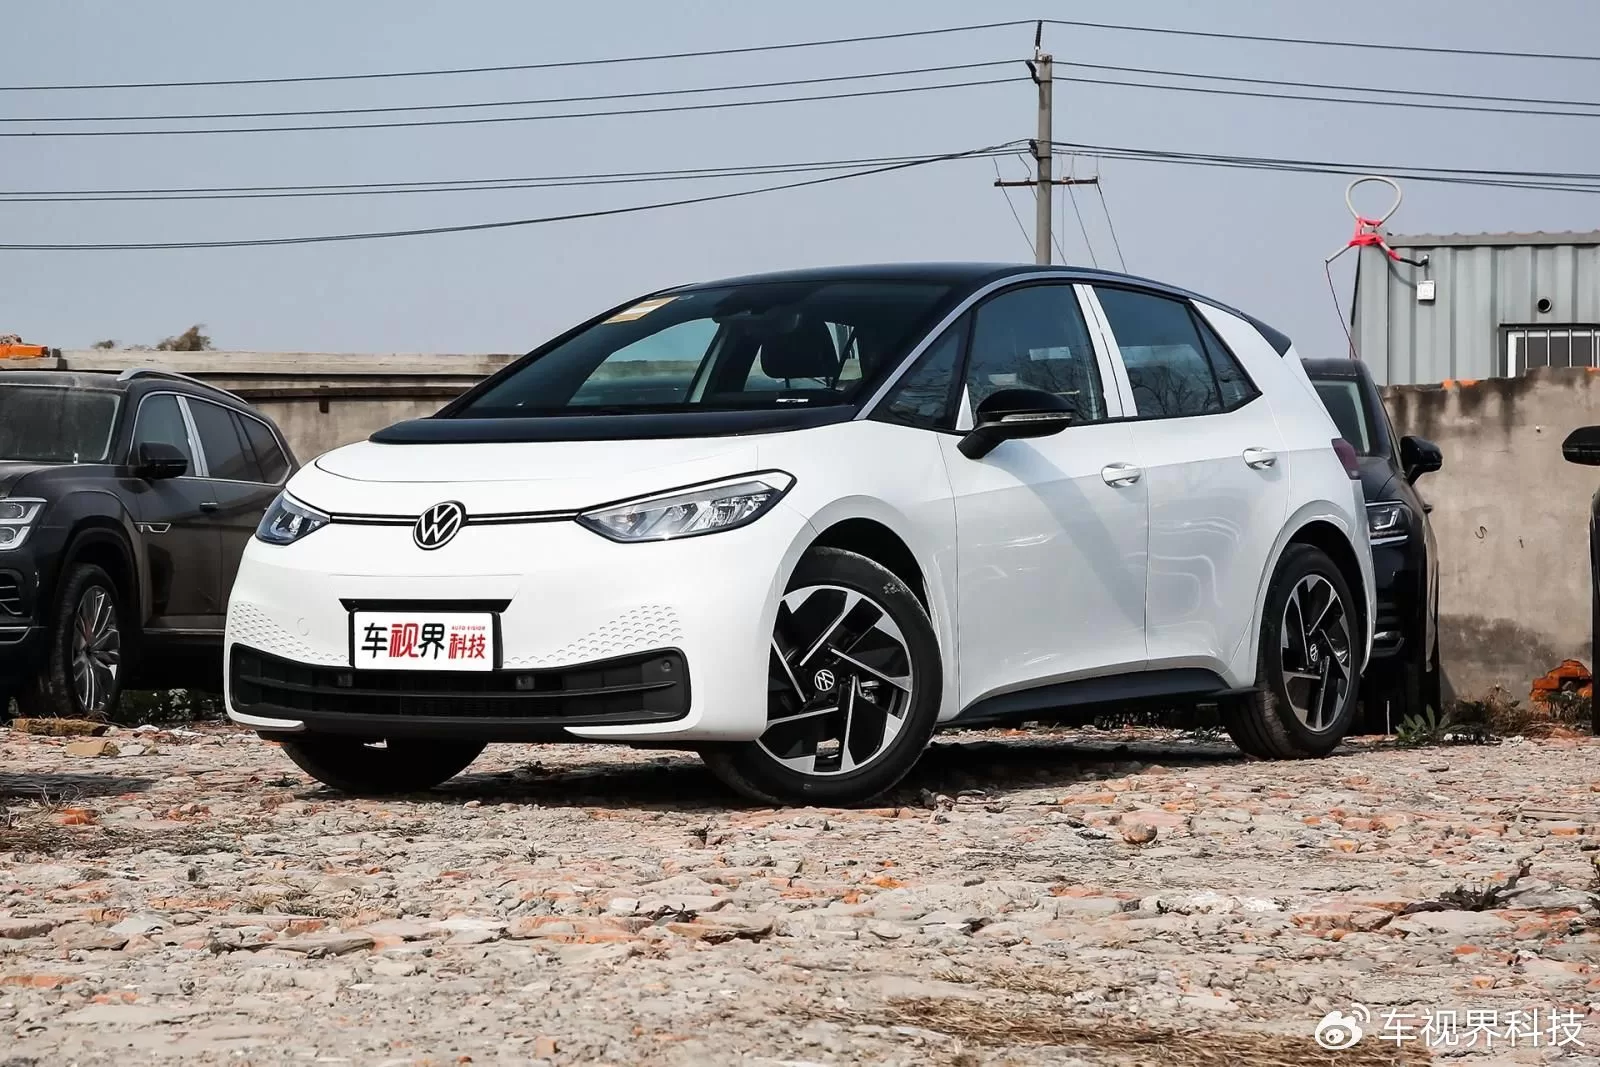 Buick Velite 6 vs. BYD Qin PLUS EV and Volkswagen ID.3: The Battle of New Energy Vehicles